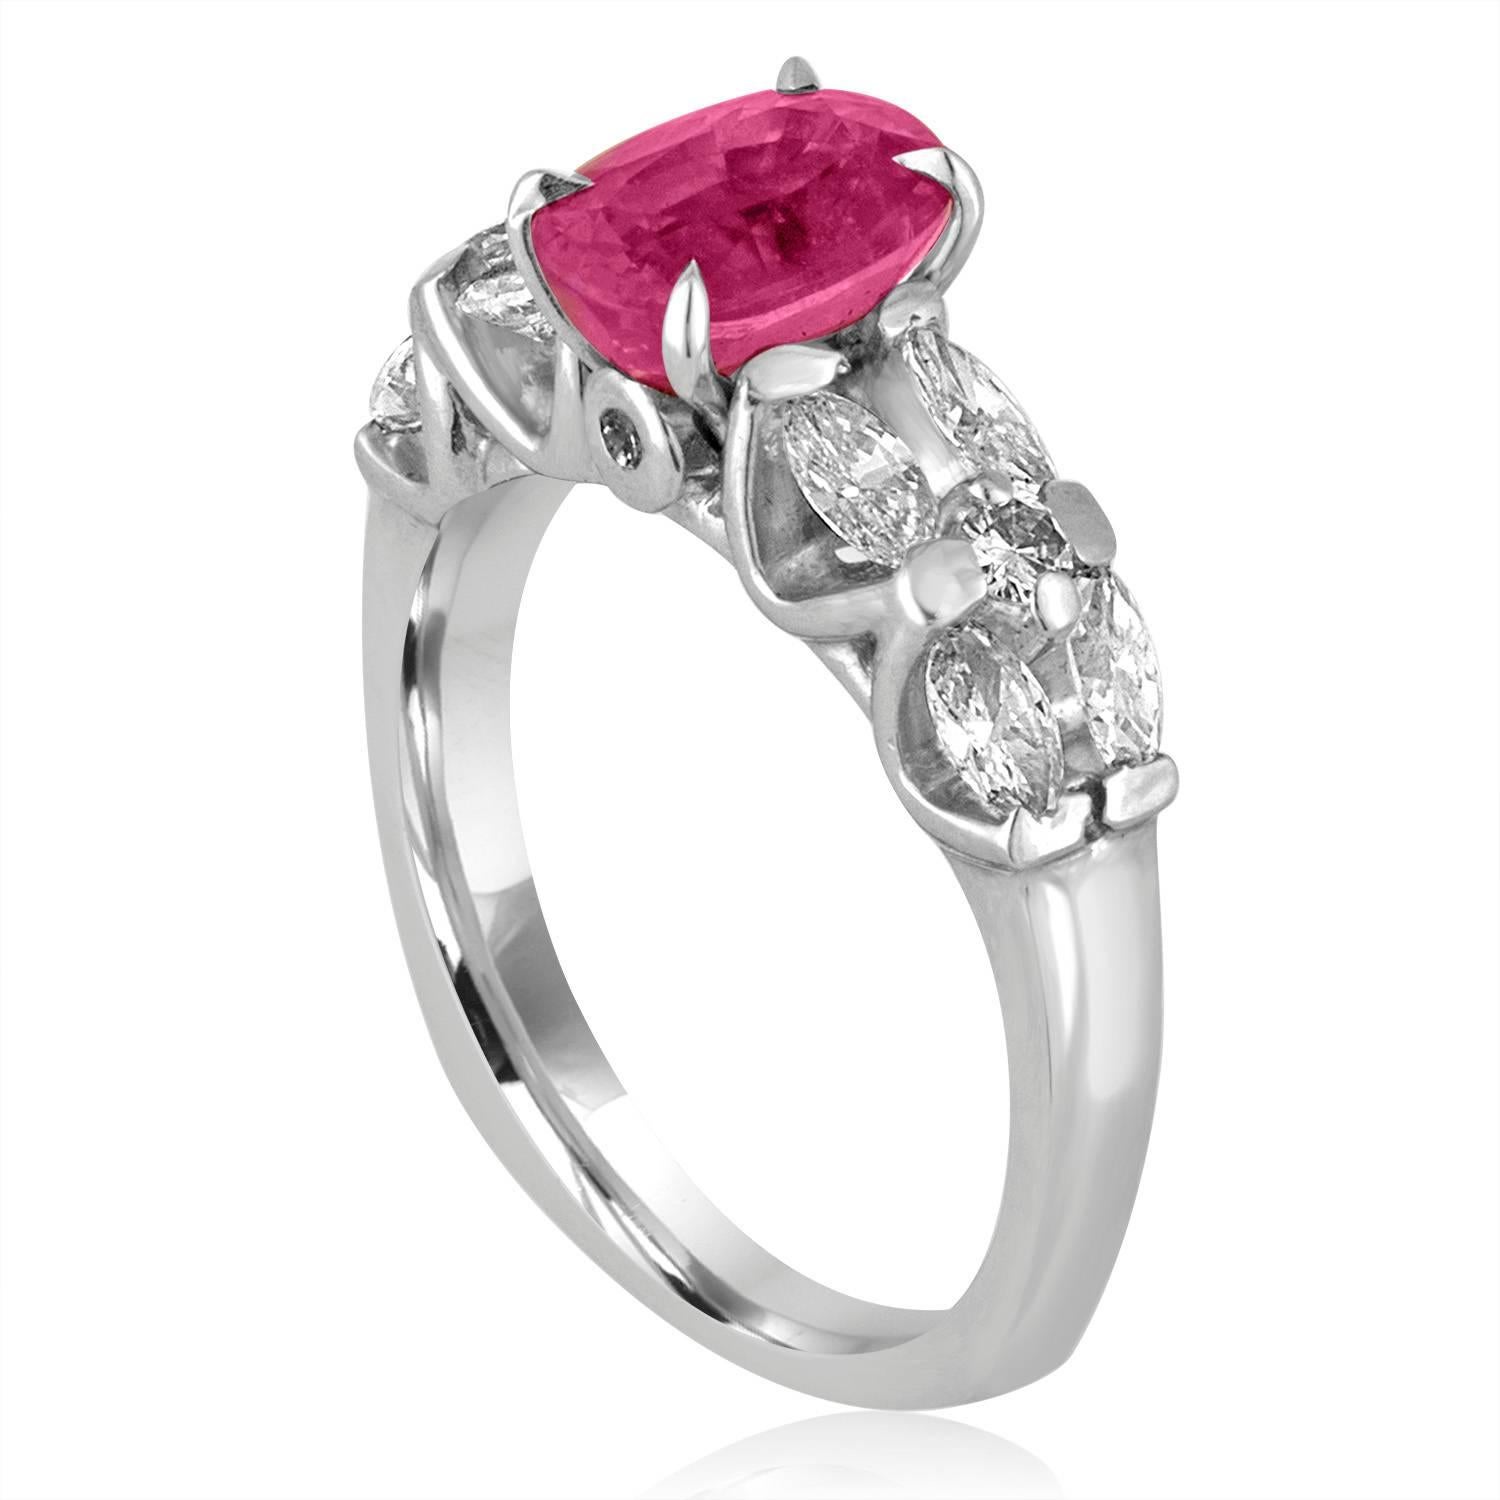 Beautiful Pink Sapphire Ring.
The ring is Platinum PLT 950.
The center stone is a 2.09 Carat Pink Sapphire.
The stone is Heated and Certified by LAPIS.
There are 0.80 Carat Diamonds G SI.
The ring is a size 6.5, sizable.
The ring weighs 7.7 grams